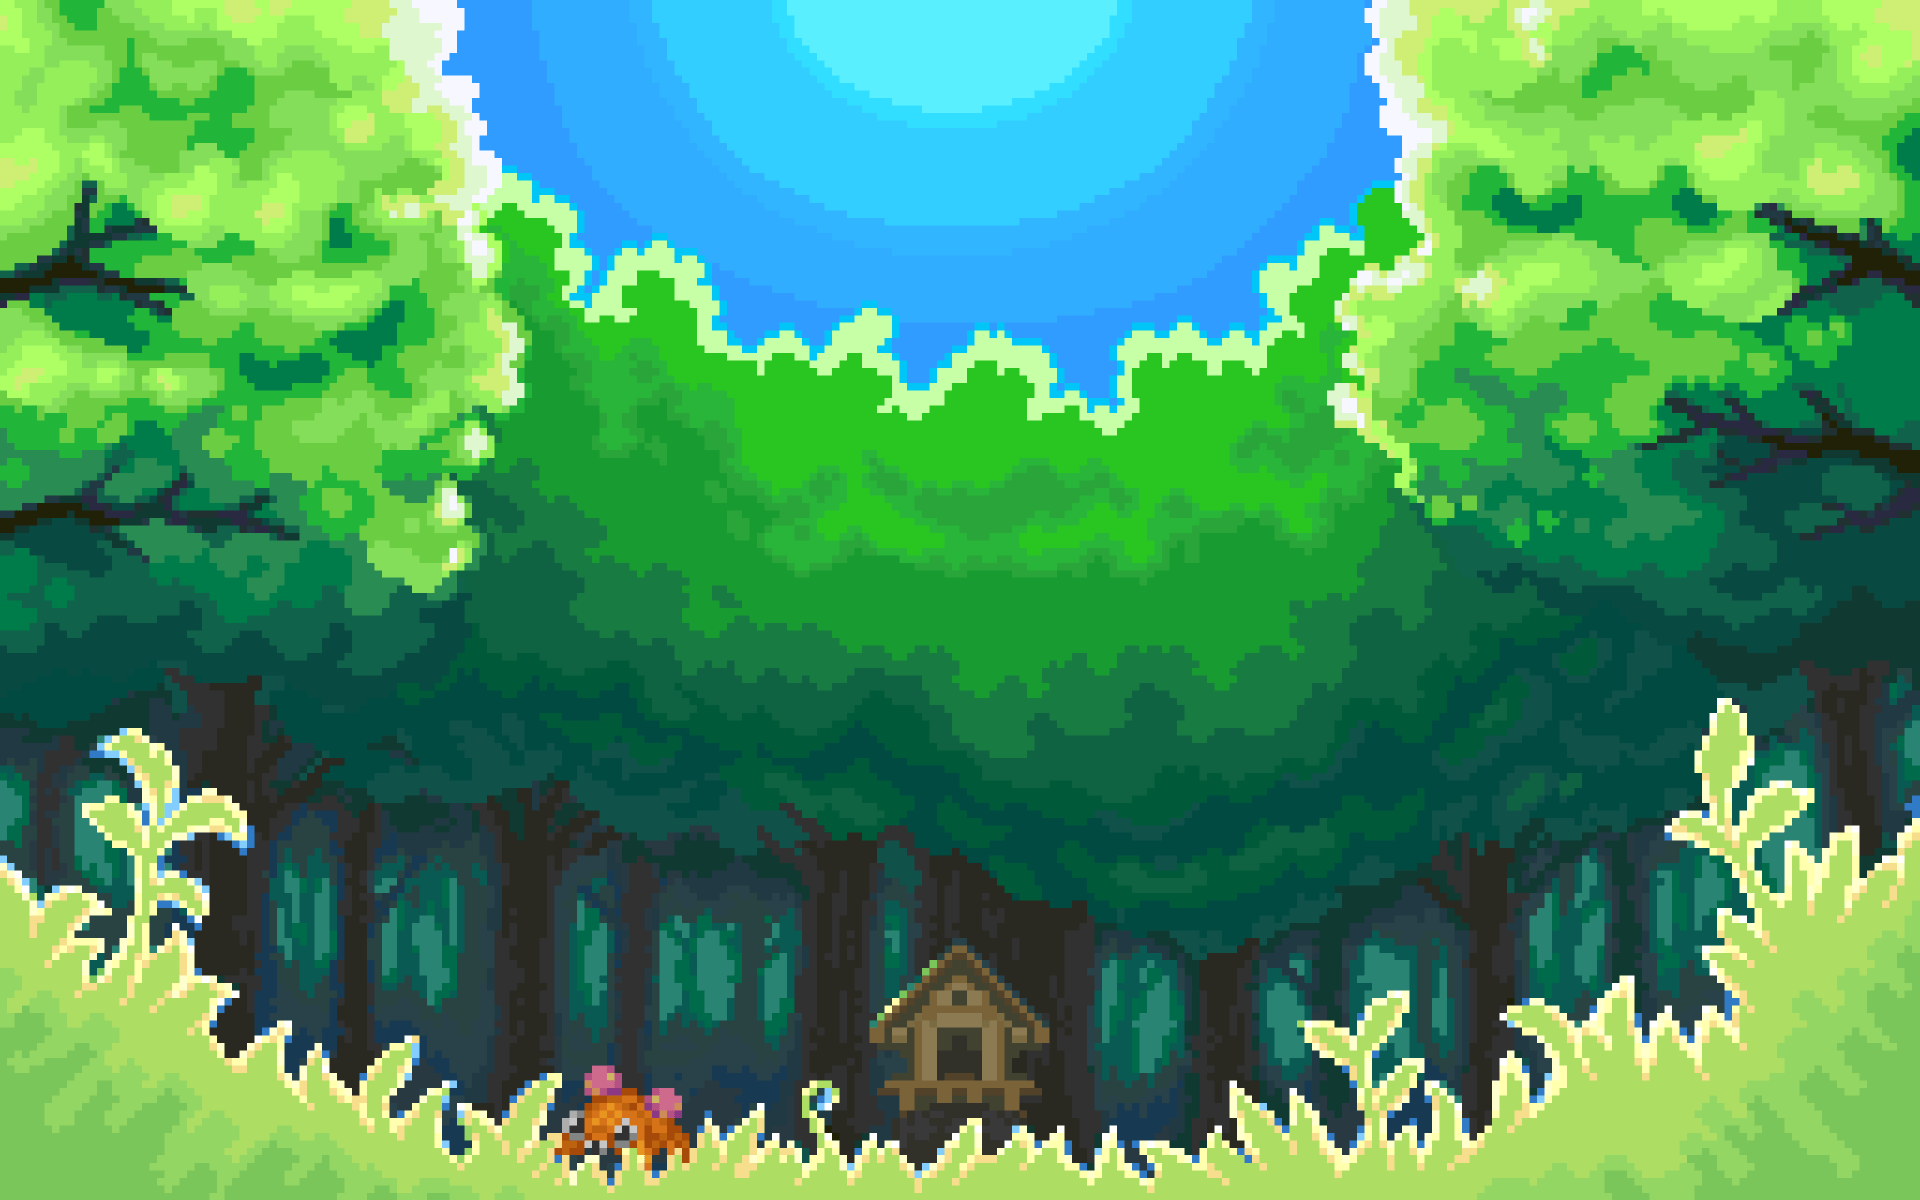 Pokemon Forest Backgrounds - Wallpaper Cave. 